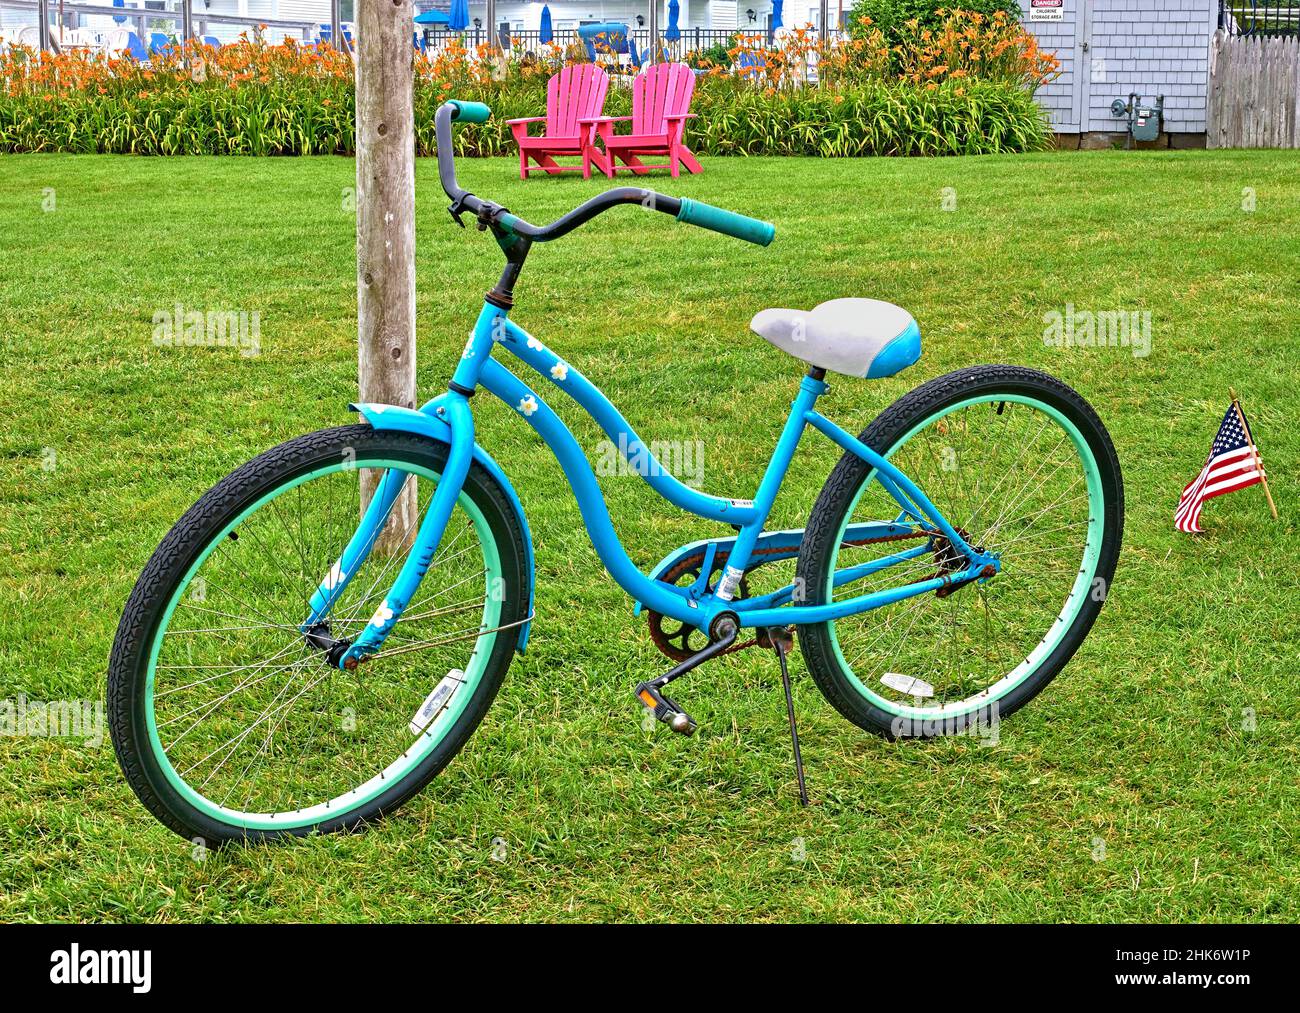 Cute blue girls bike or bicycle. Near the Entrance to Hyannis harbor,on Lewis Bay in Cape Cod Massachusetts,USA. Stock Photo